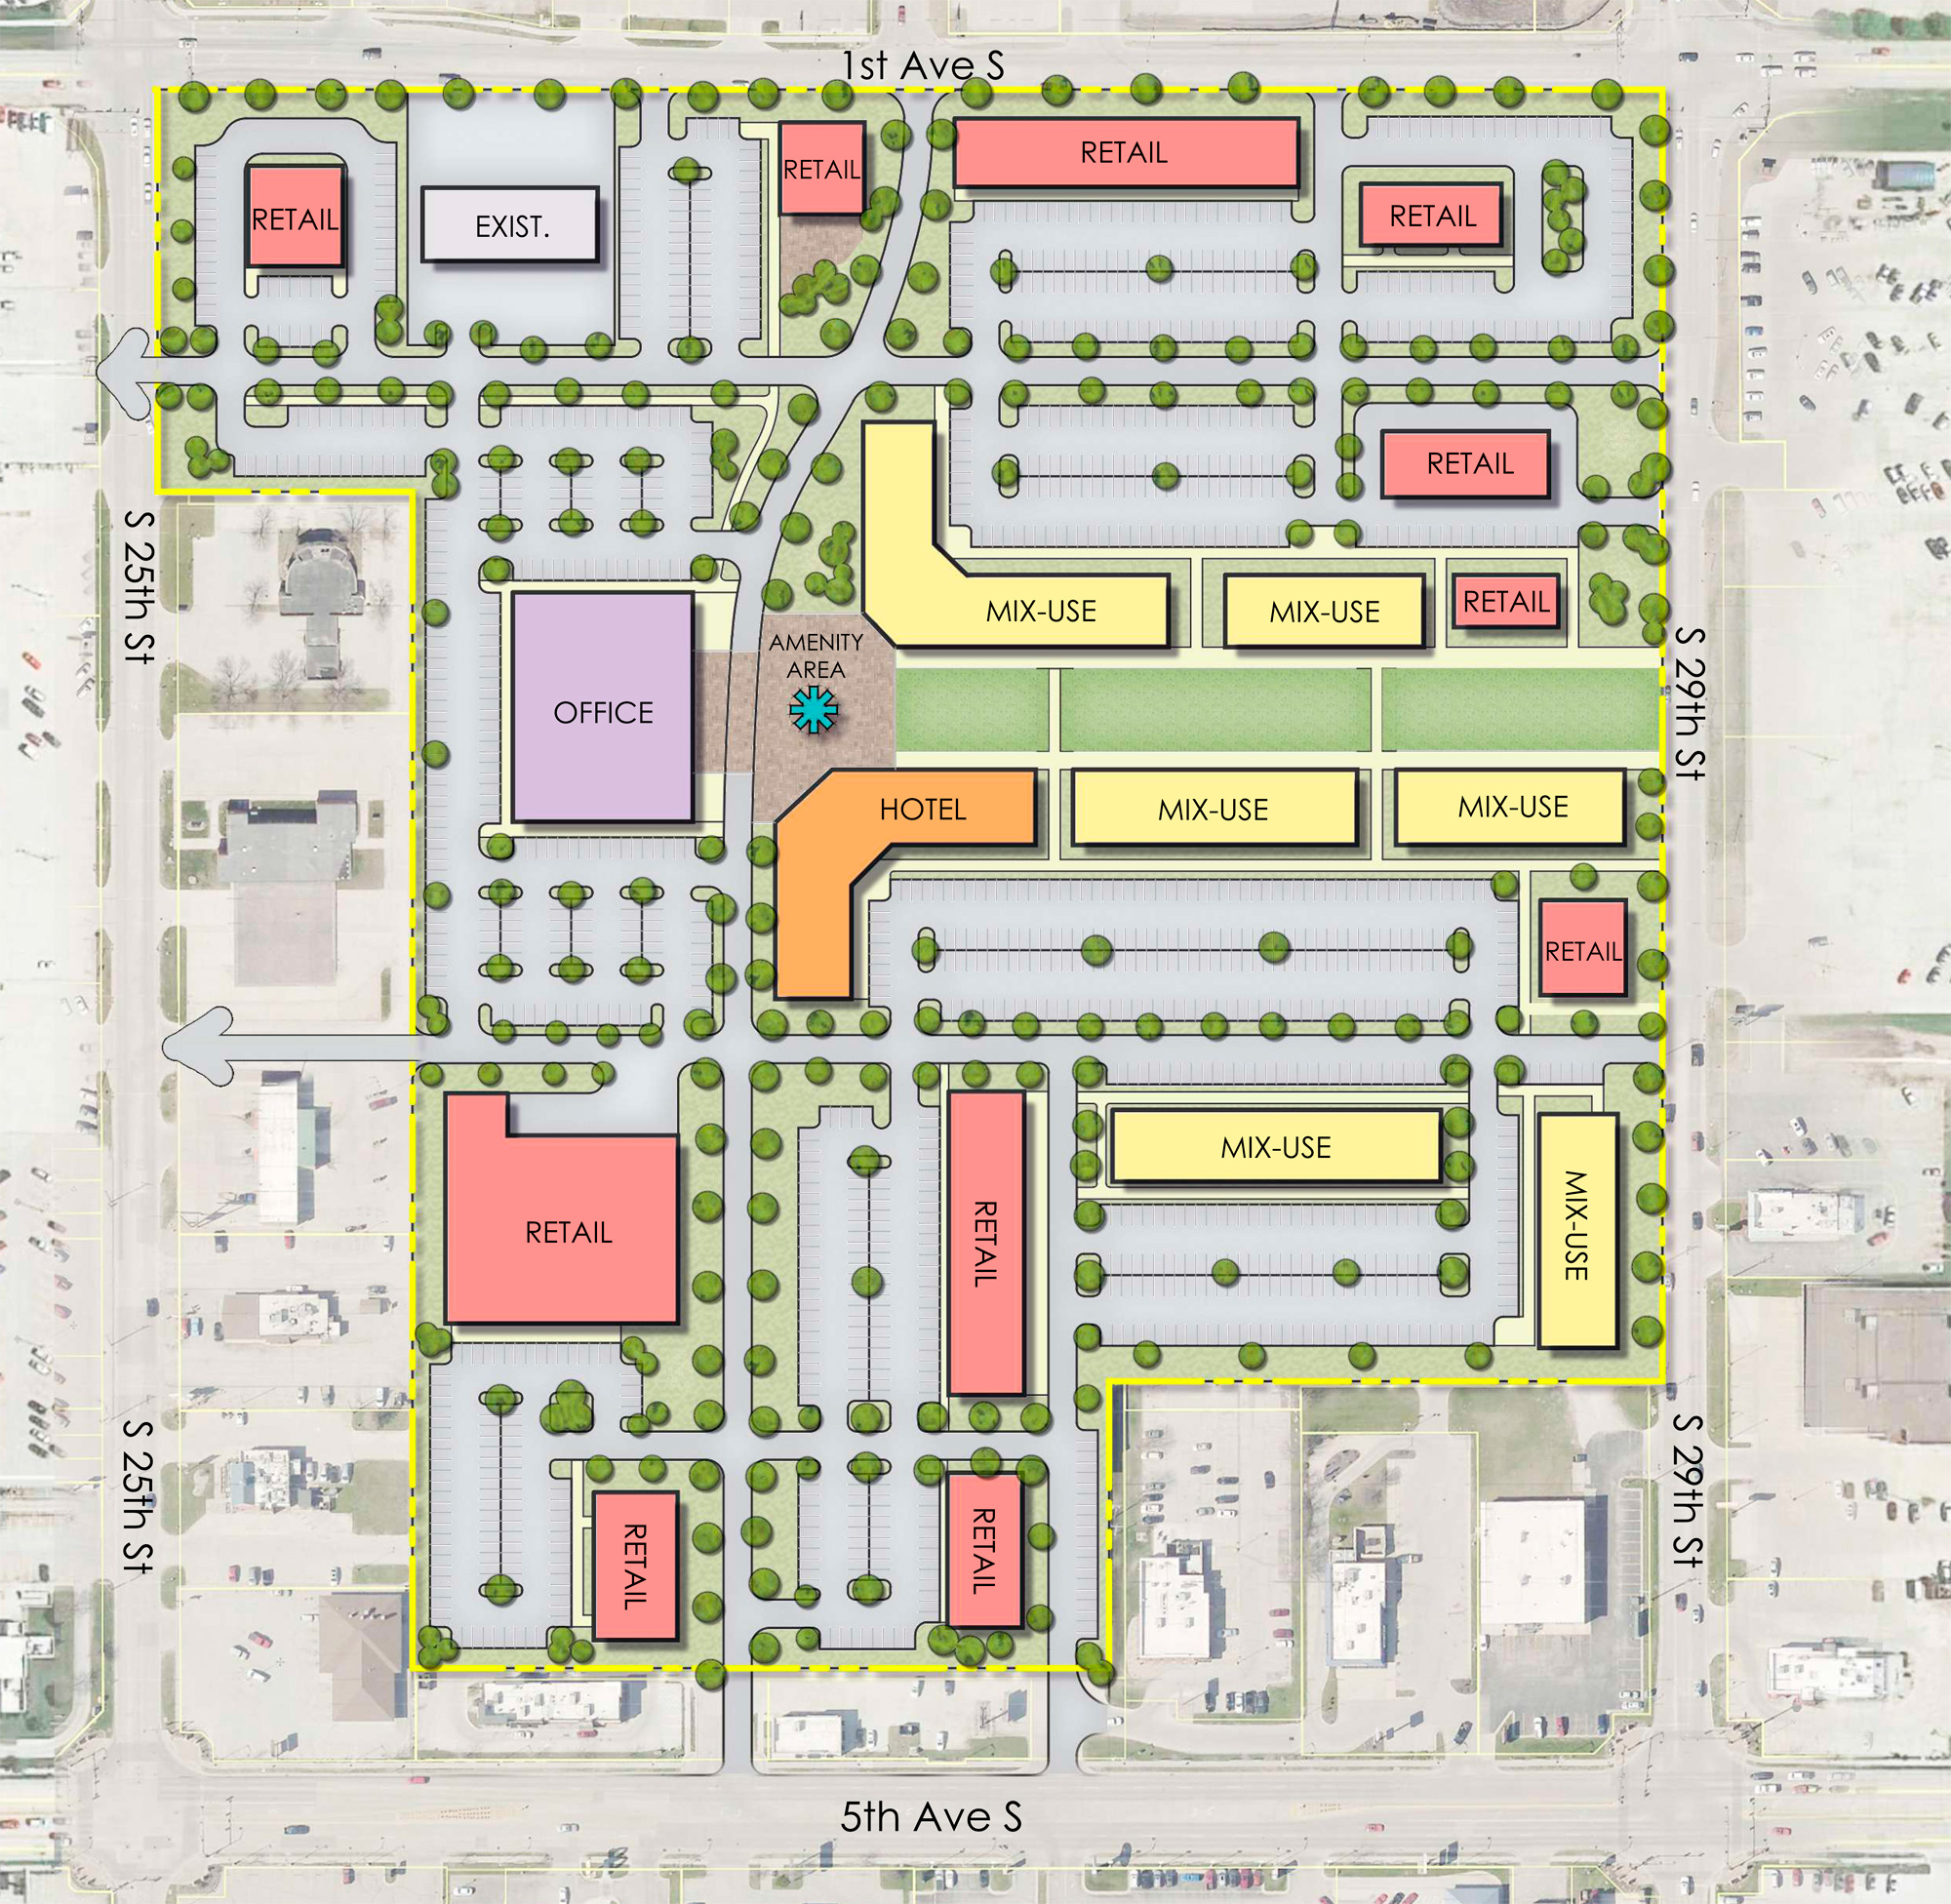 Webinar: Redeveloping Malls and Aging Shopping Centers